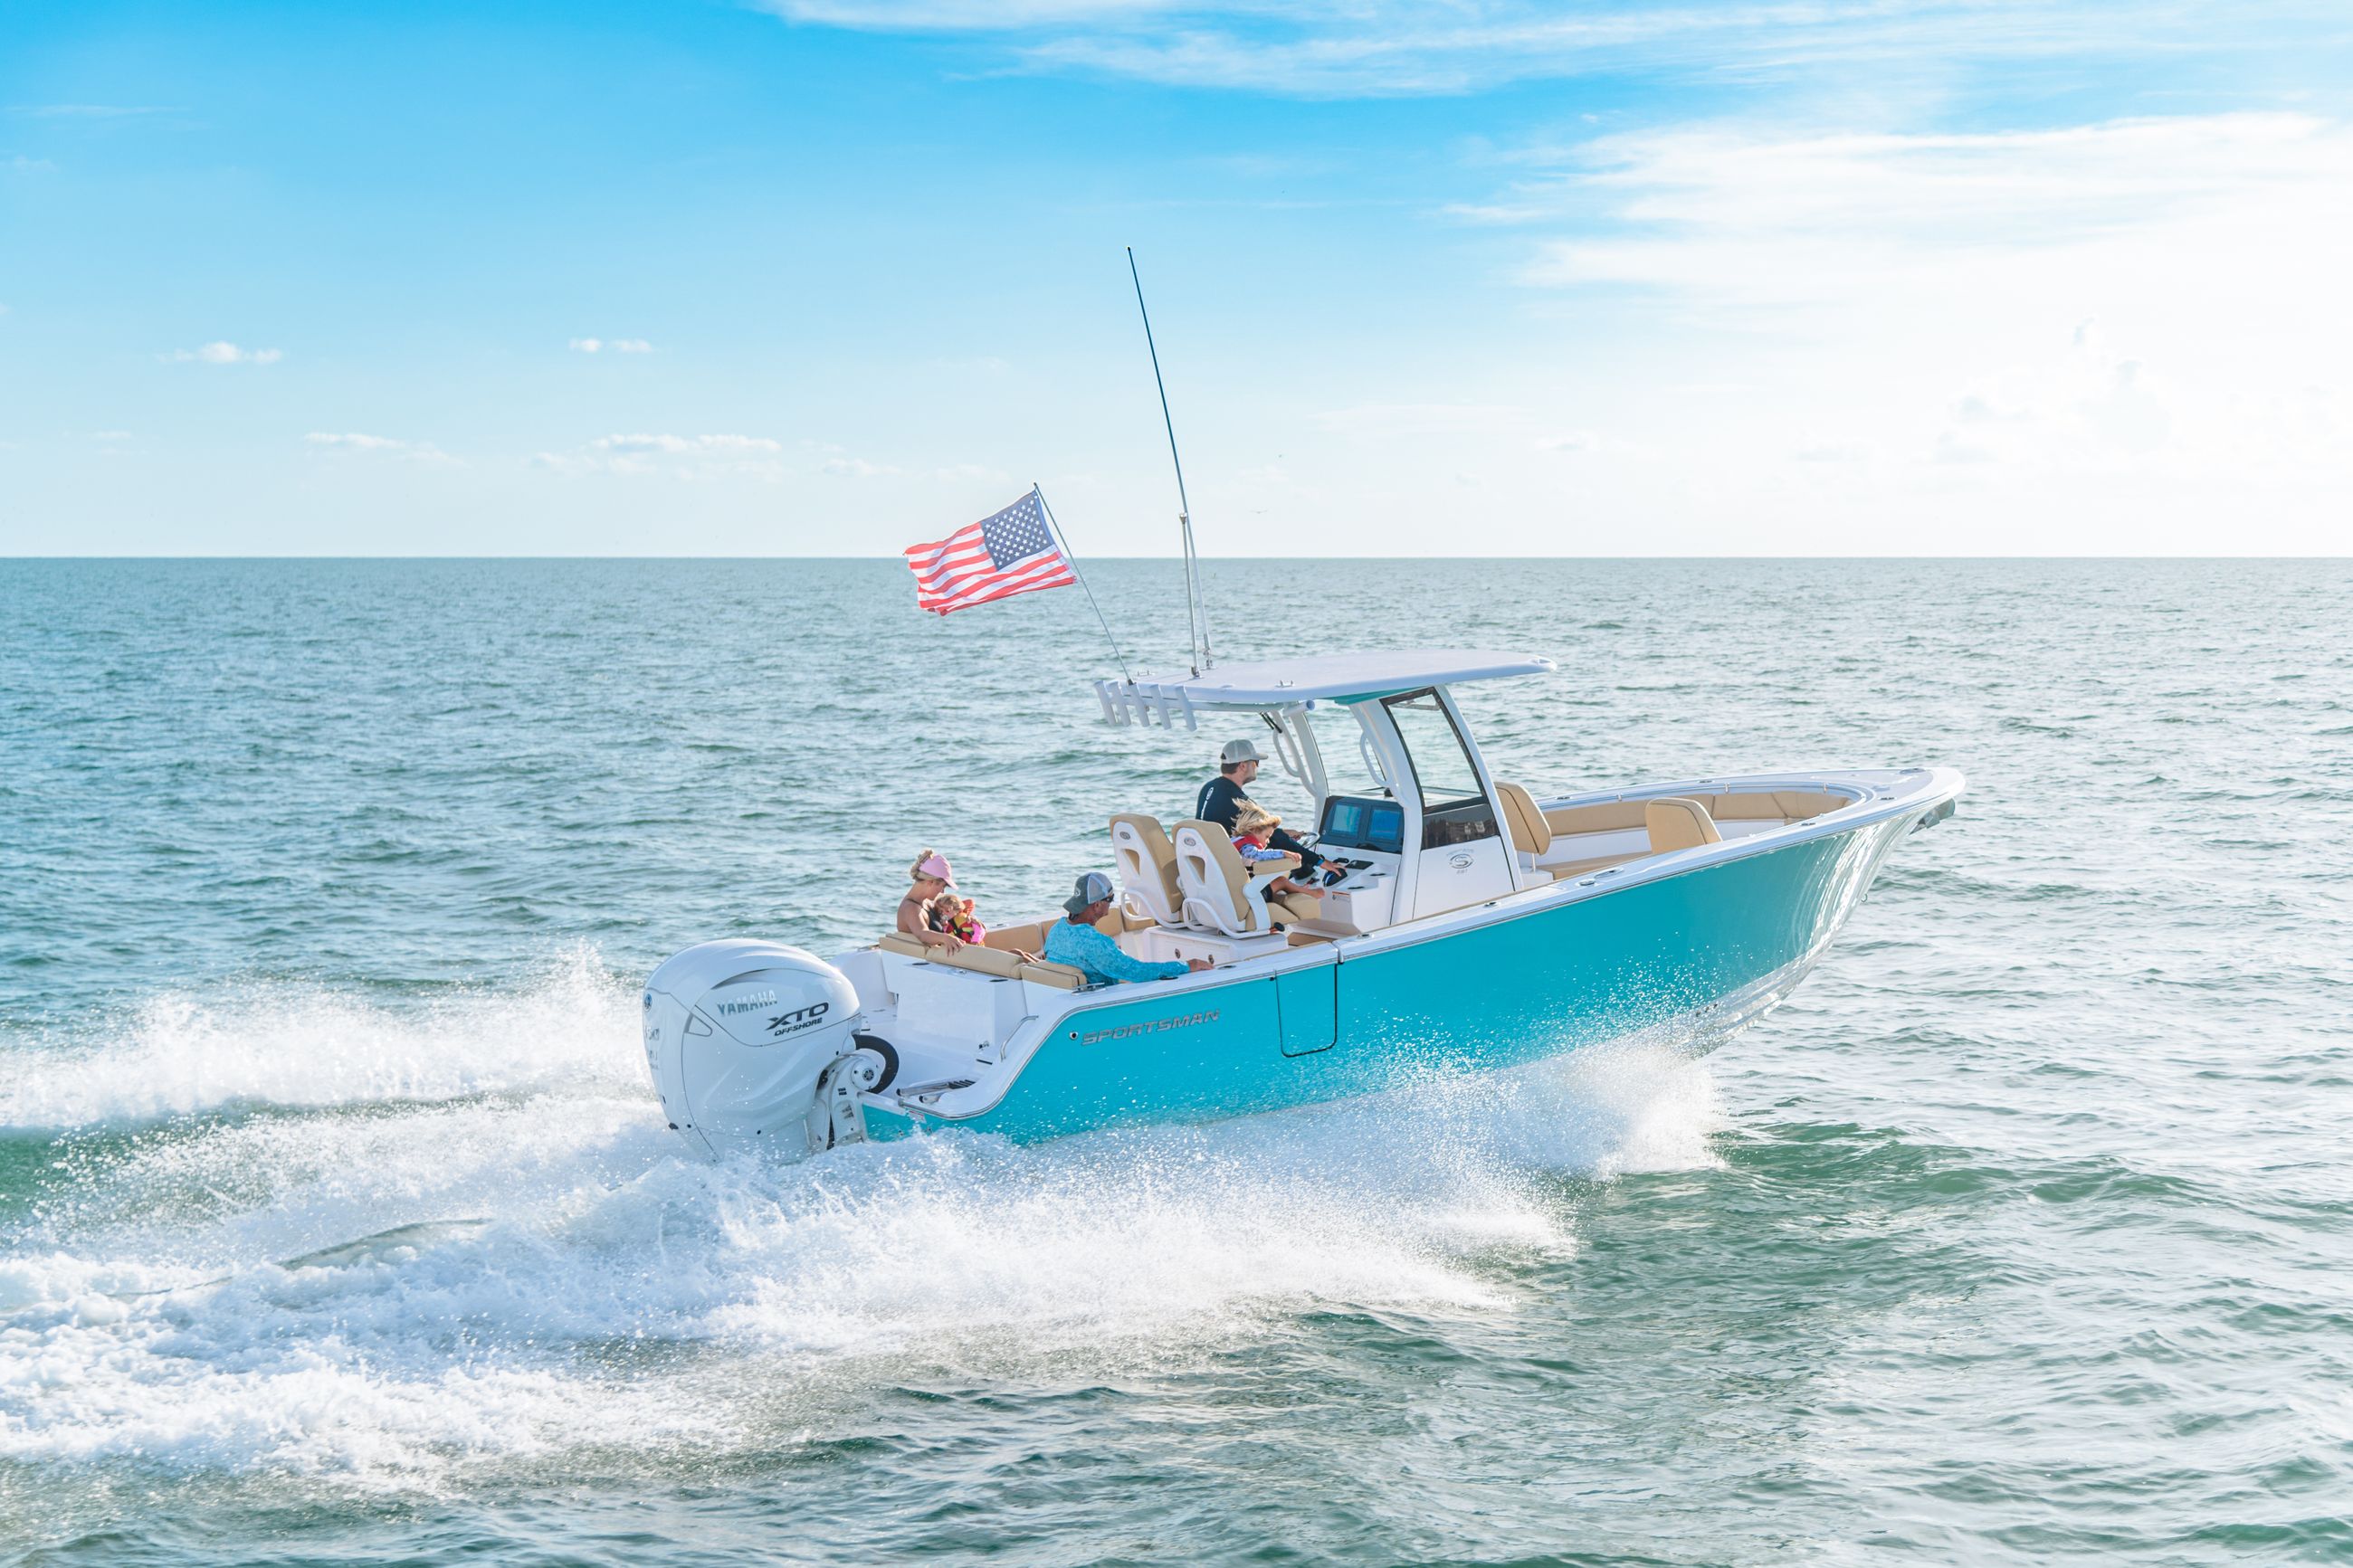 Image of a Sportsman Boat on the water.